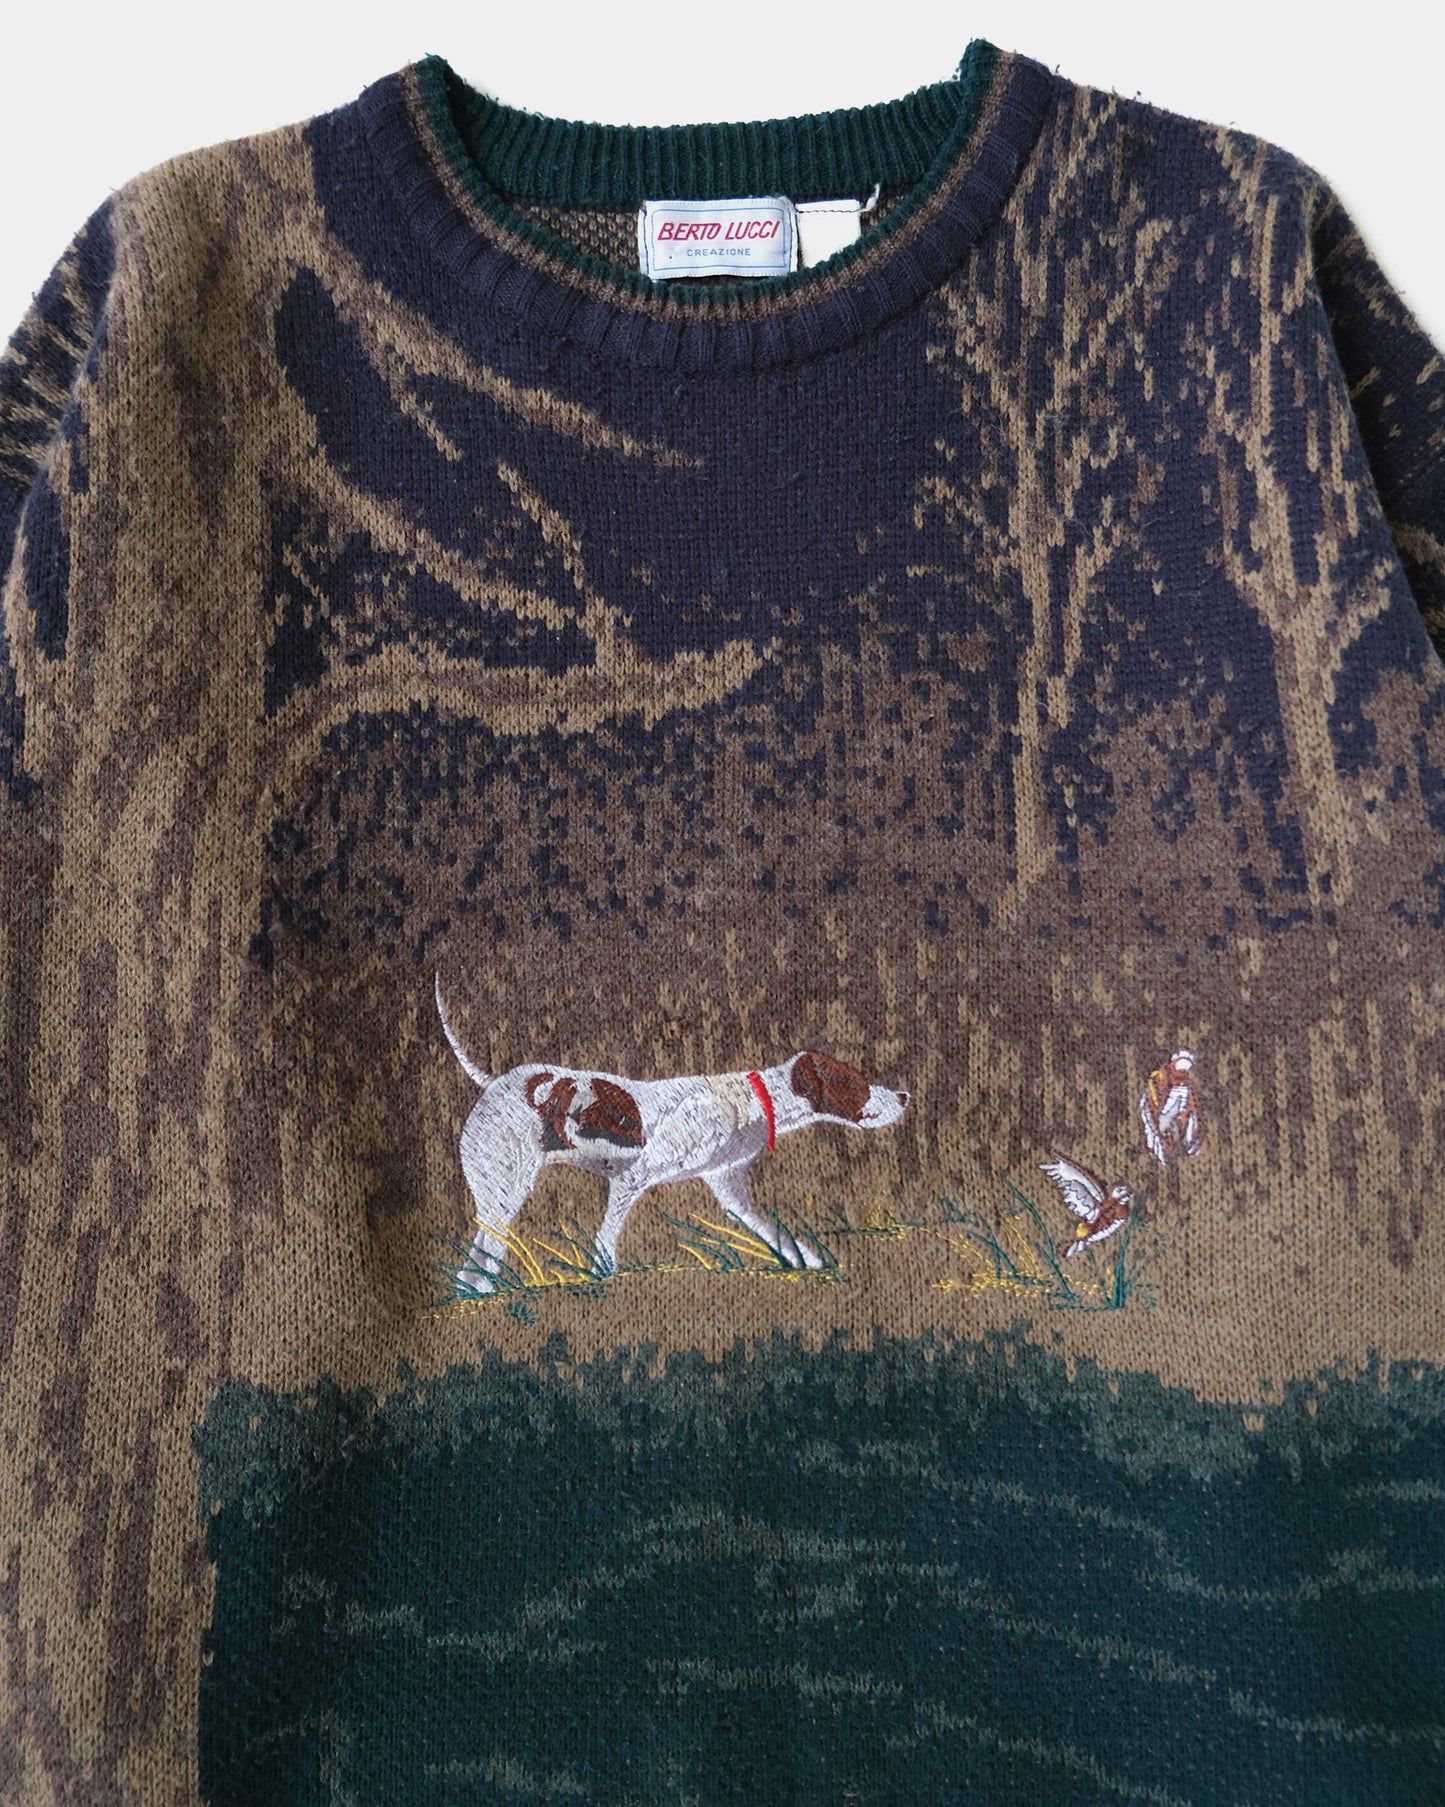 90s Embroidered Sweater